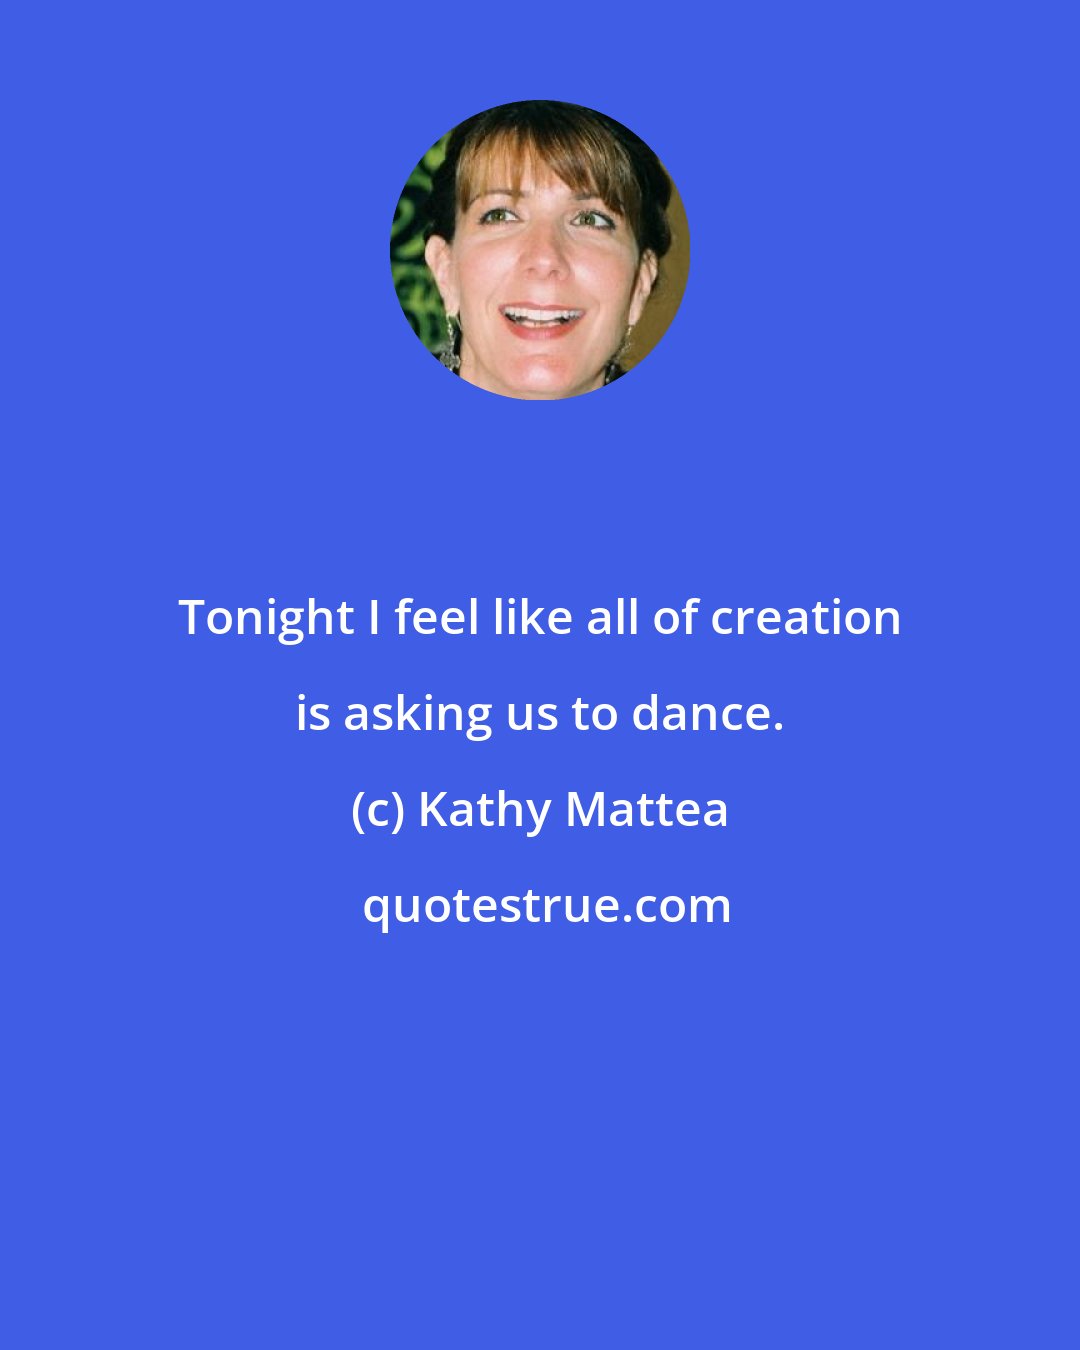 Kathy Mattea: Tonight I feel like all of creation is asking us to dance.